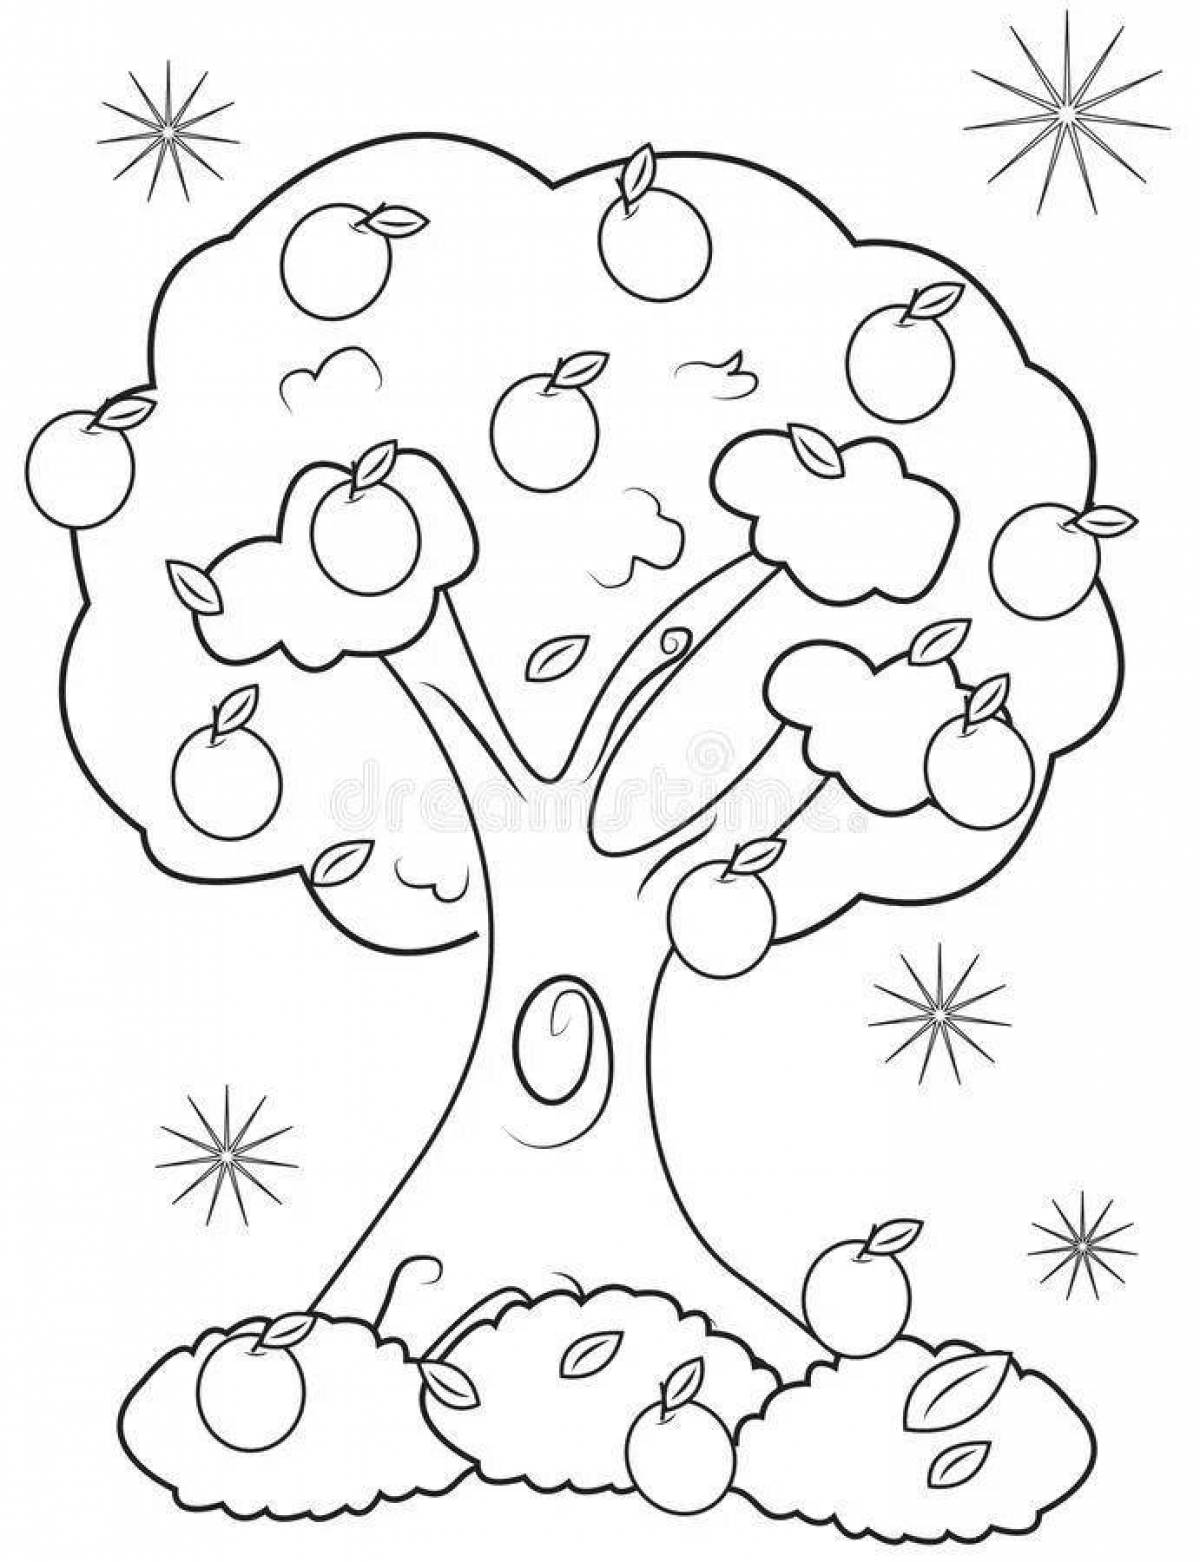 Live coloring tree with apples